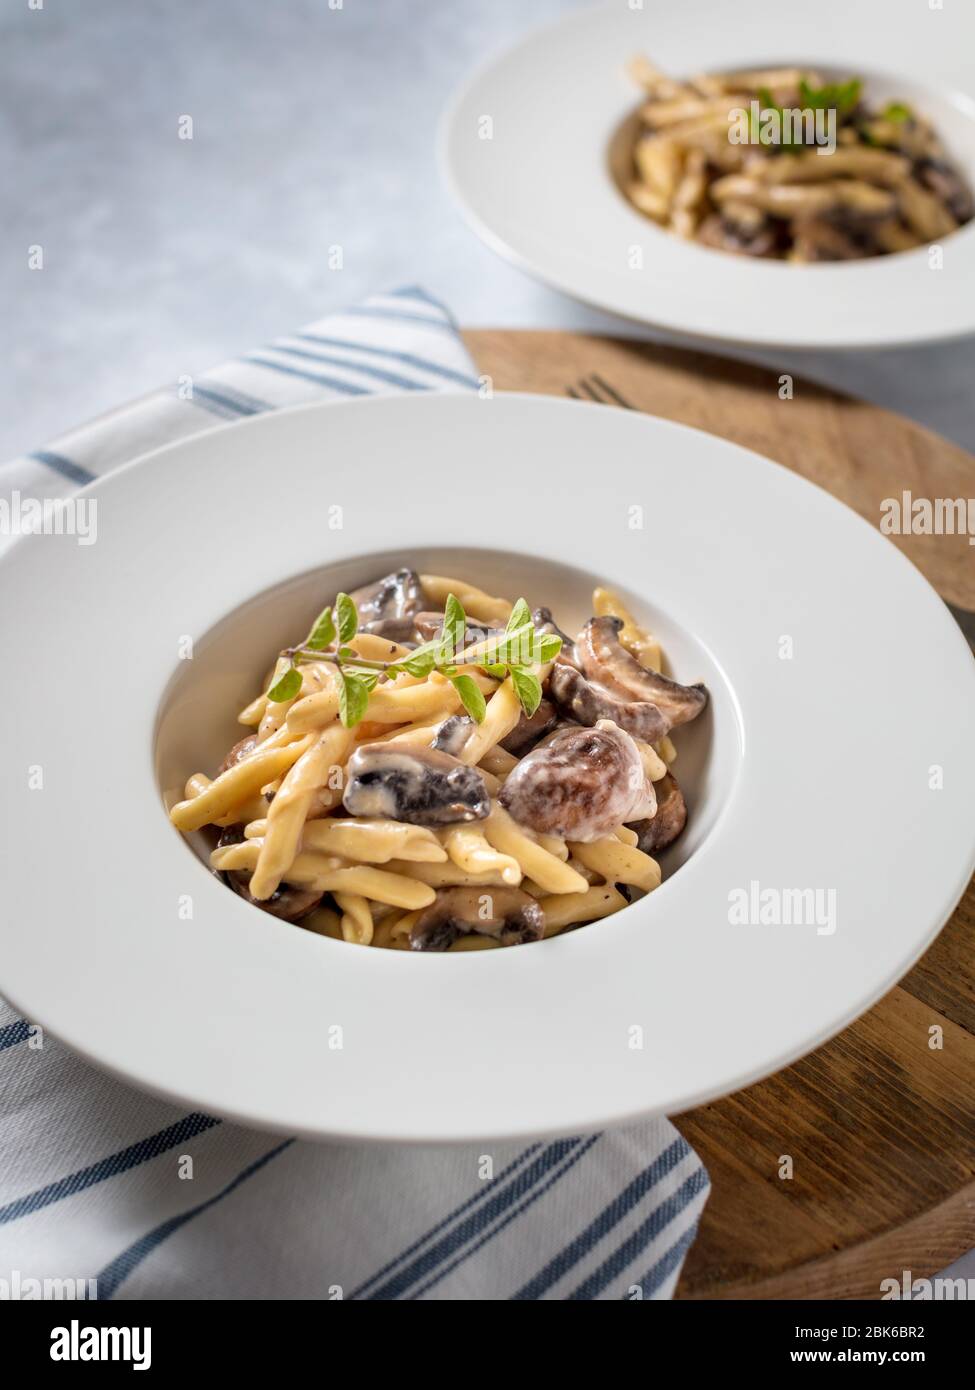 Garlic Mushroom Pasta served in a white bowl on a wooden board. Shallow DOF Stock Photo